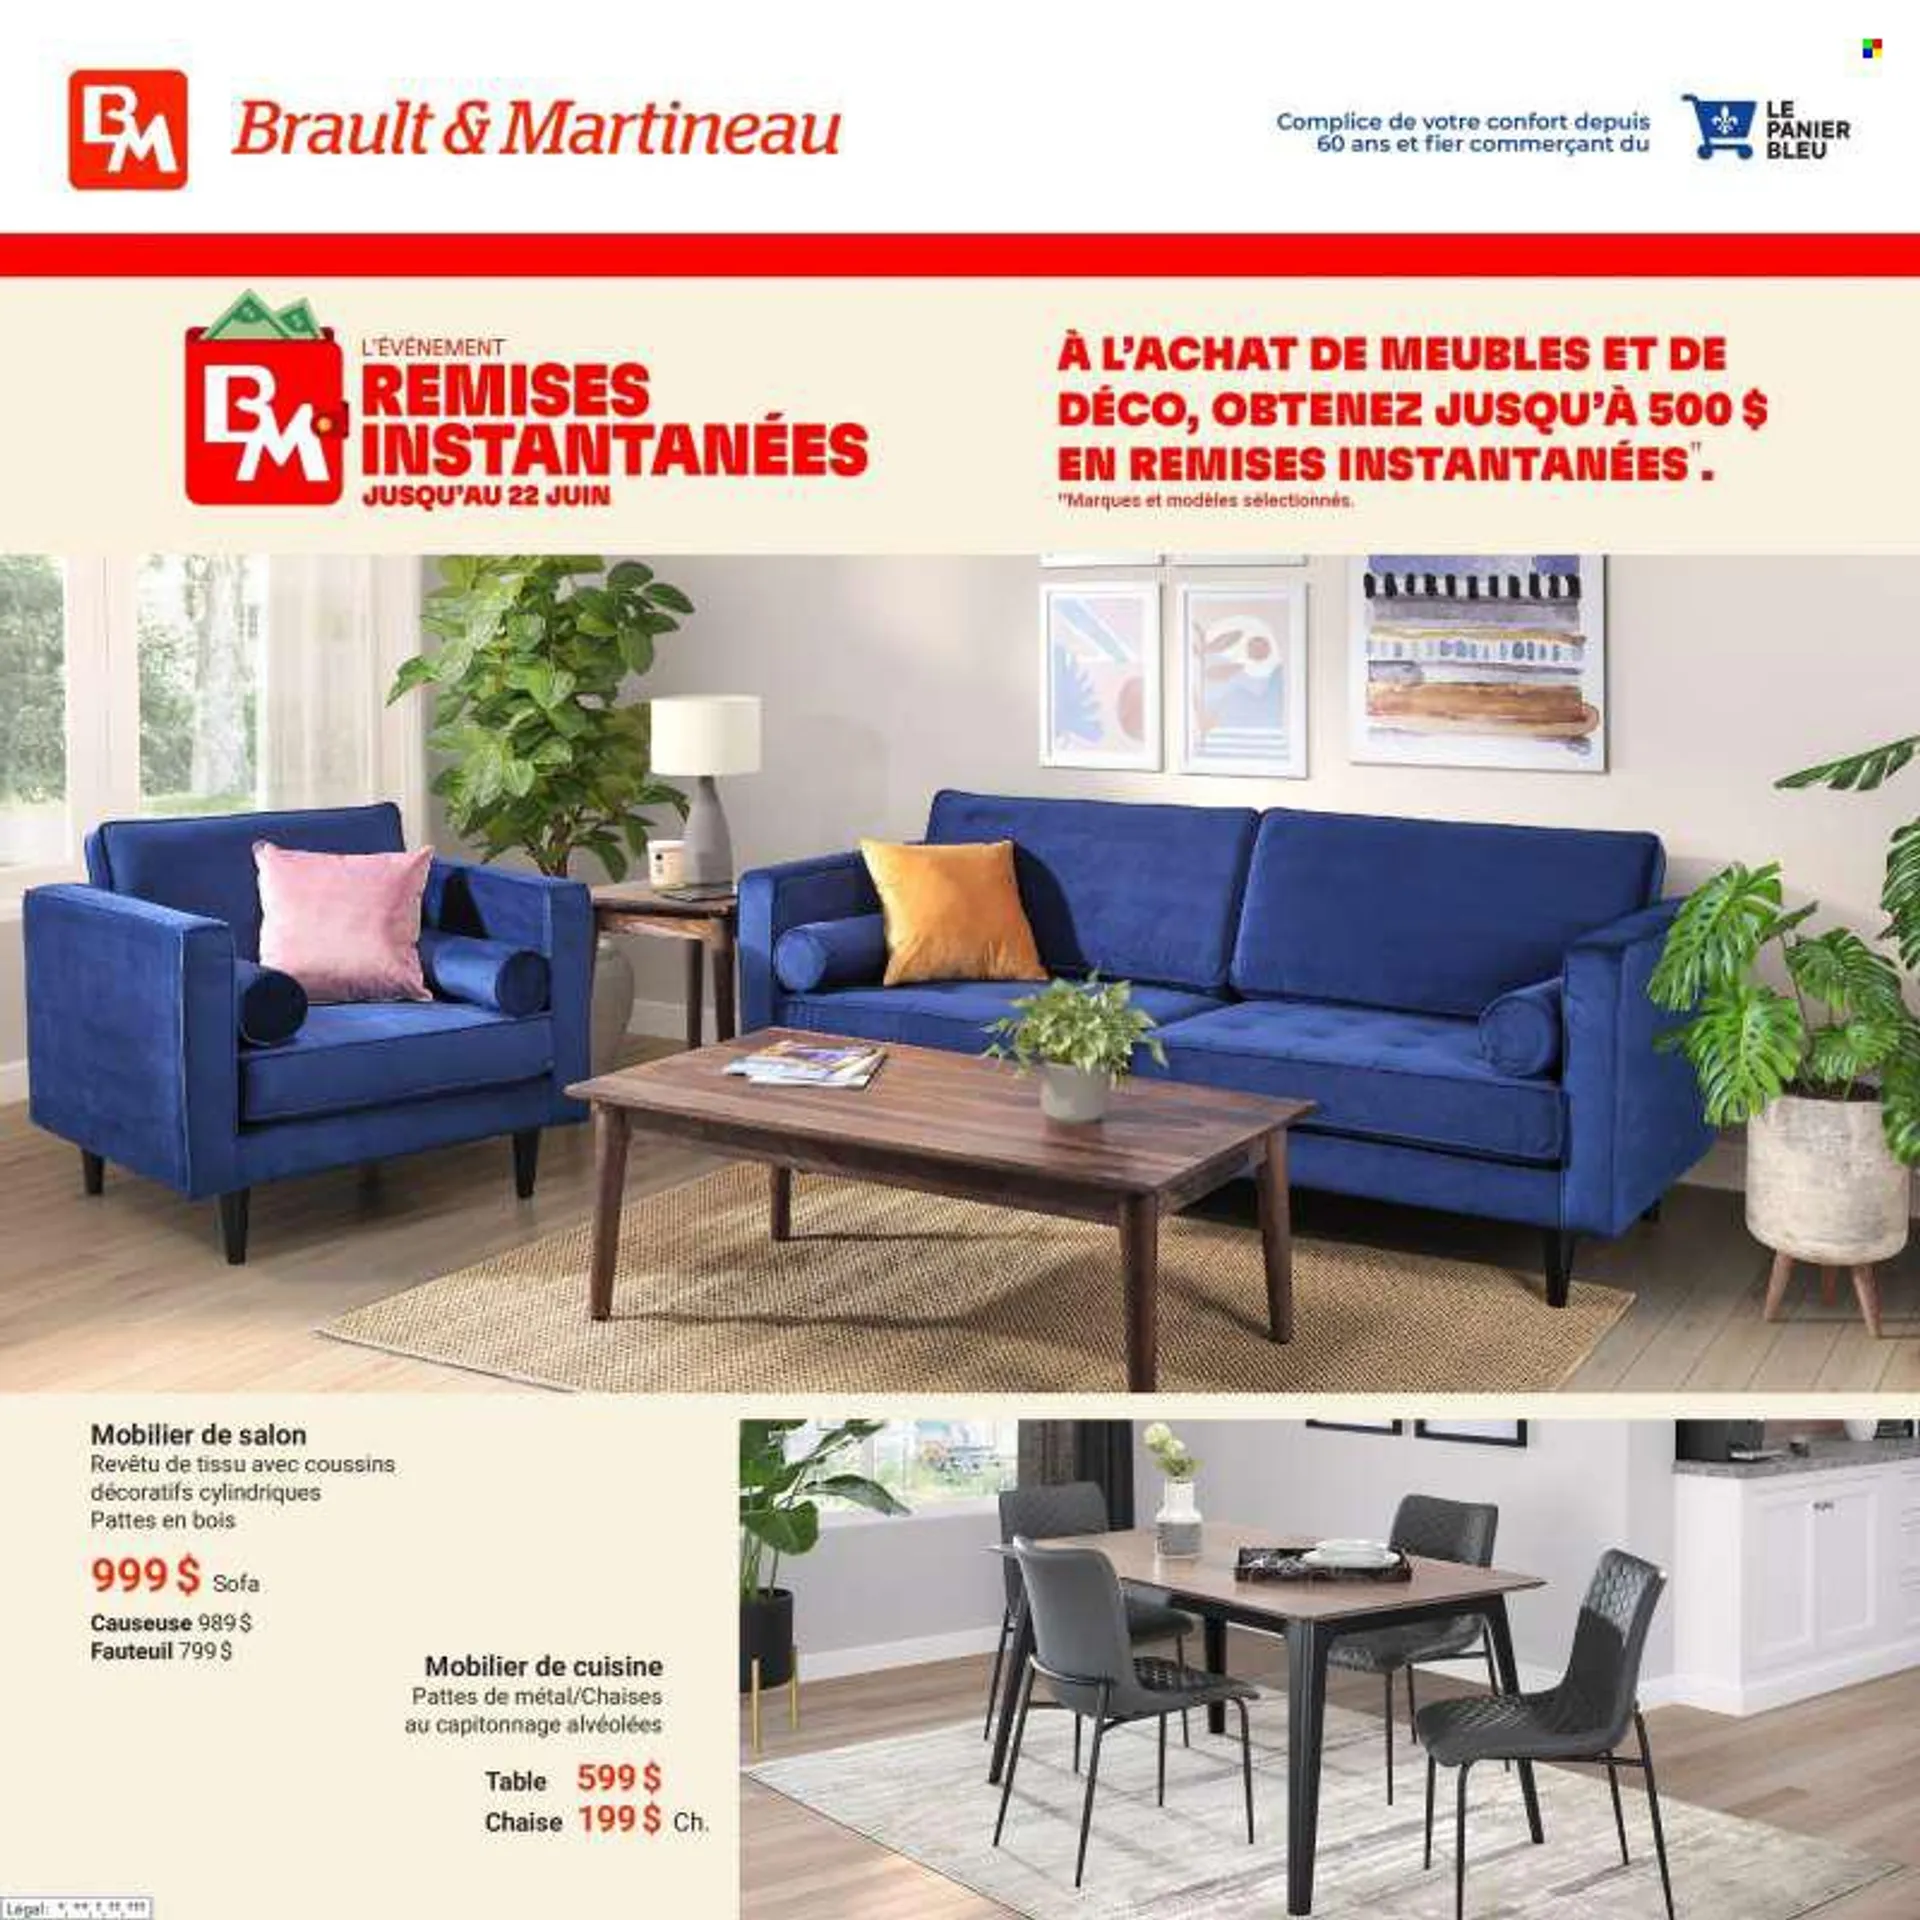 Brault & Martineau Flyer - May 24, 2022 - June 22, 2022. from May 24 to June 22 2022 - flyer page 1